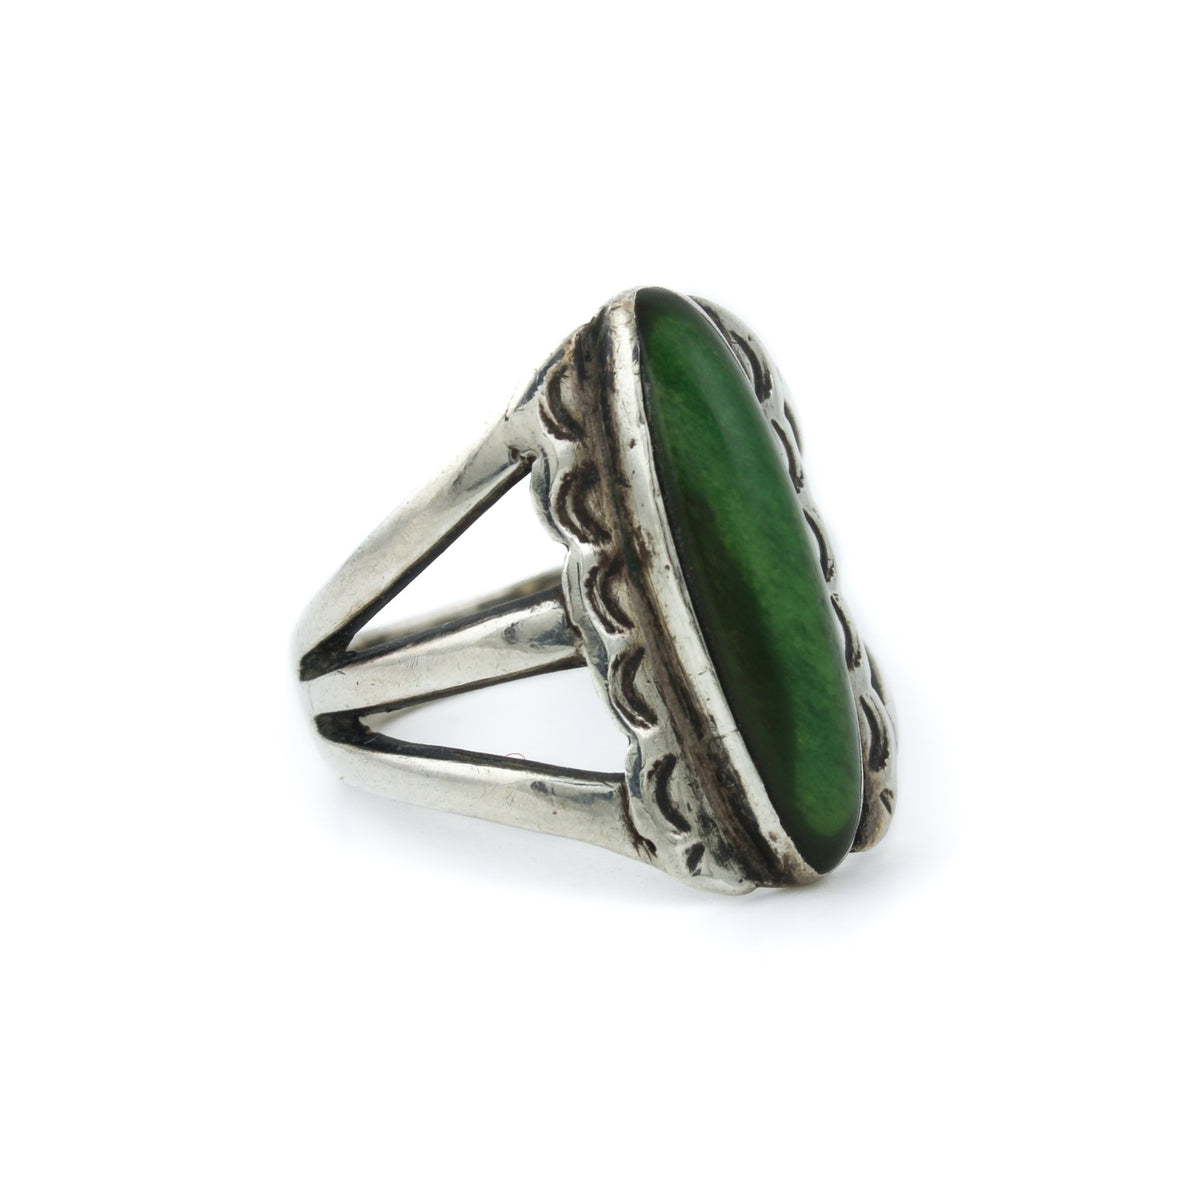 1940's Green Oblong Turquoise Ring - Kingdom Jewelry